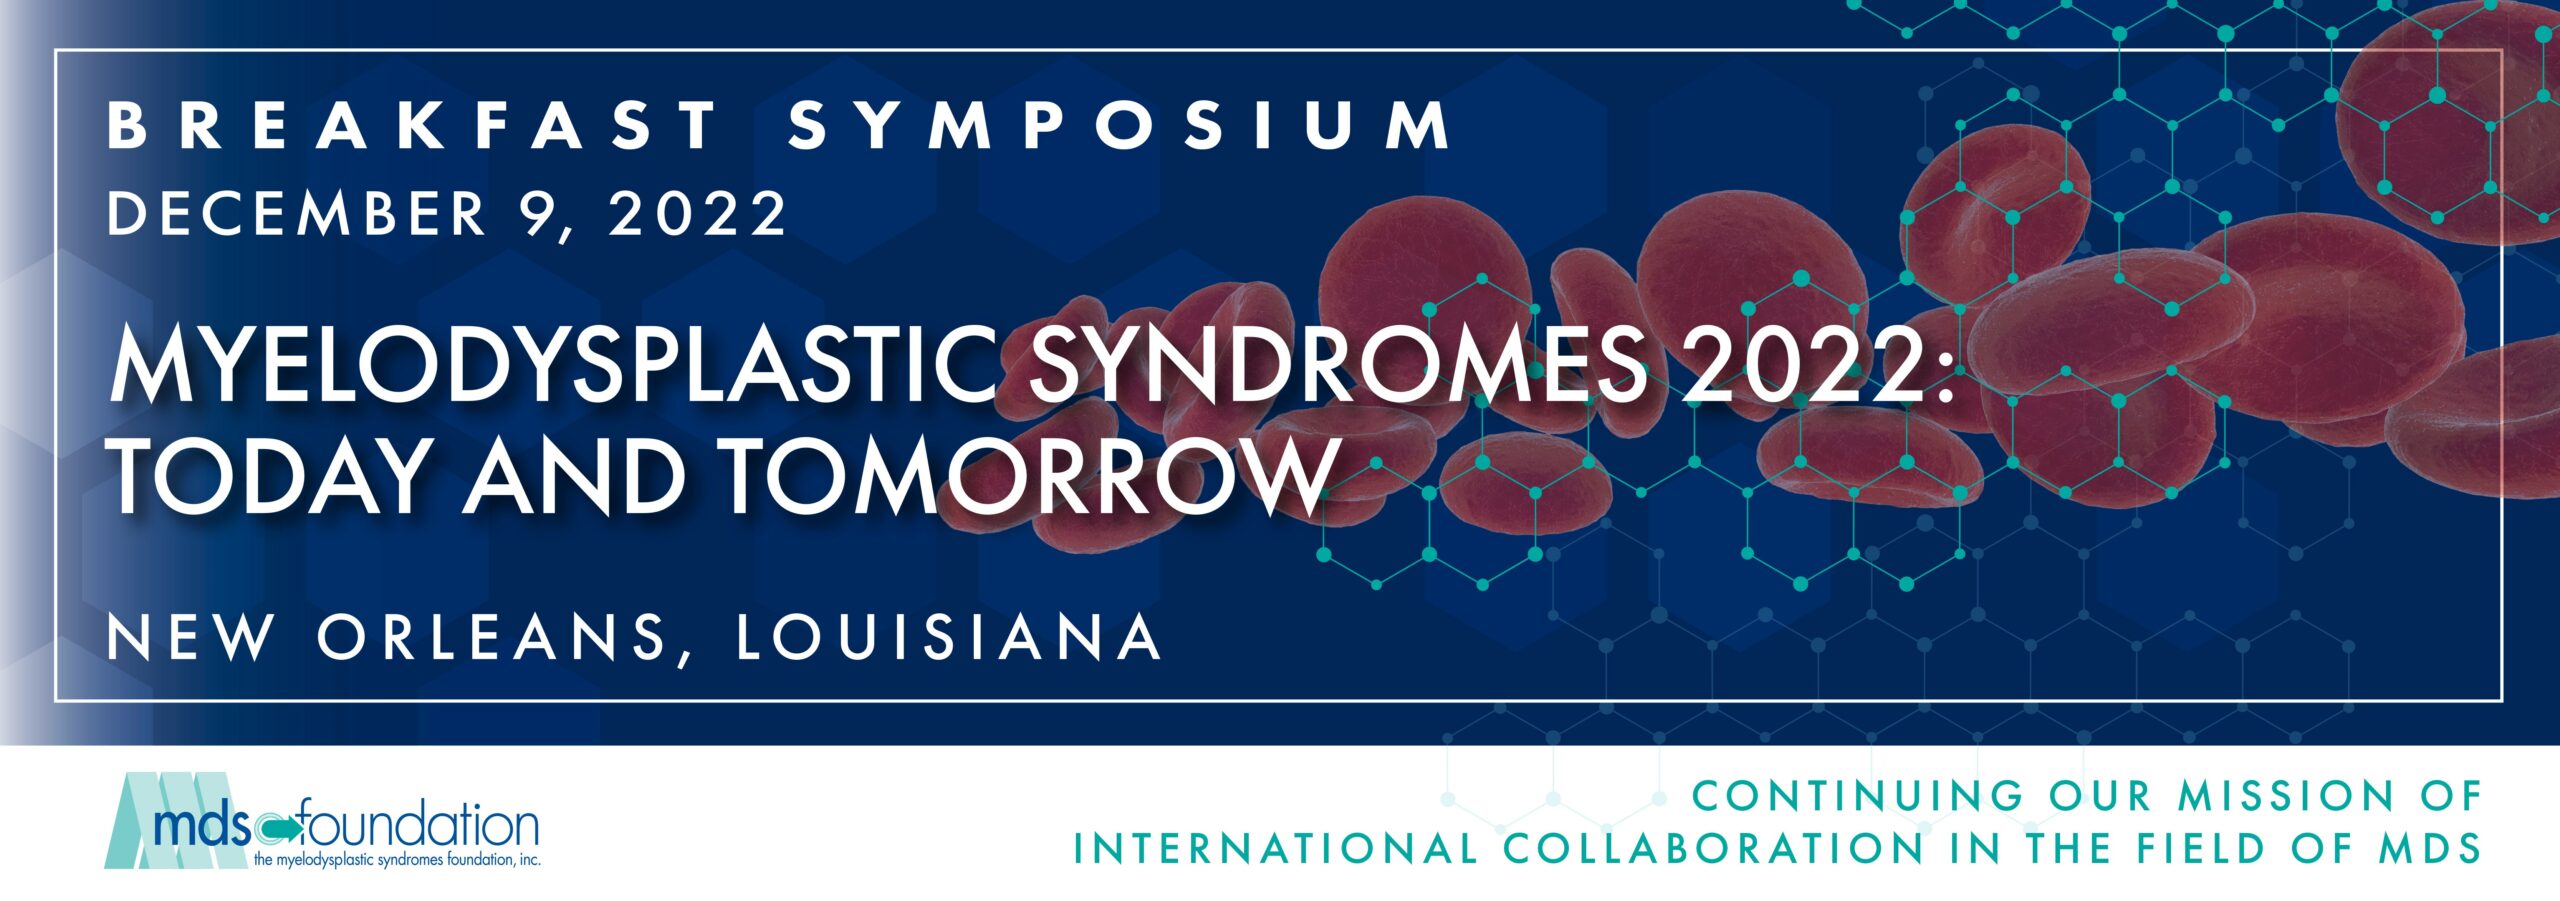 ASH Breakfast Symposium - MDS 2022 Today and Tomorrow - New Orleans, LA, Dec 9, 2022